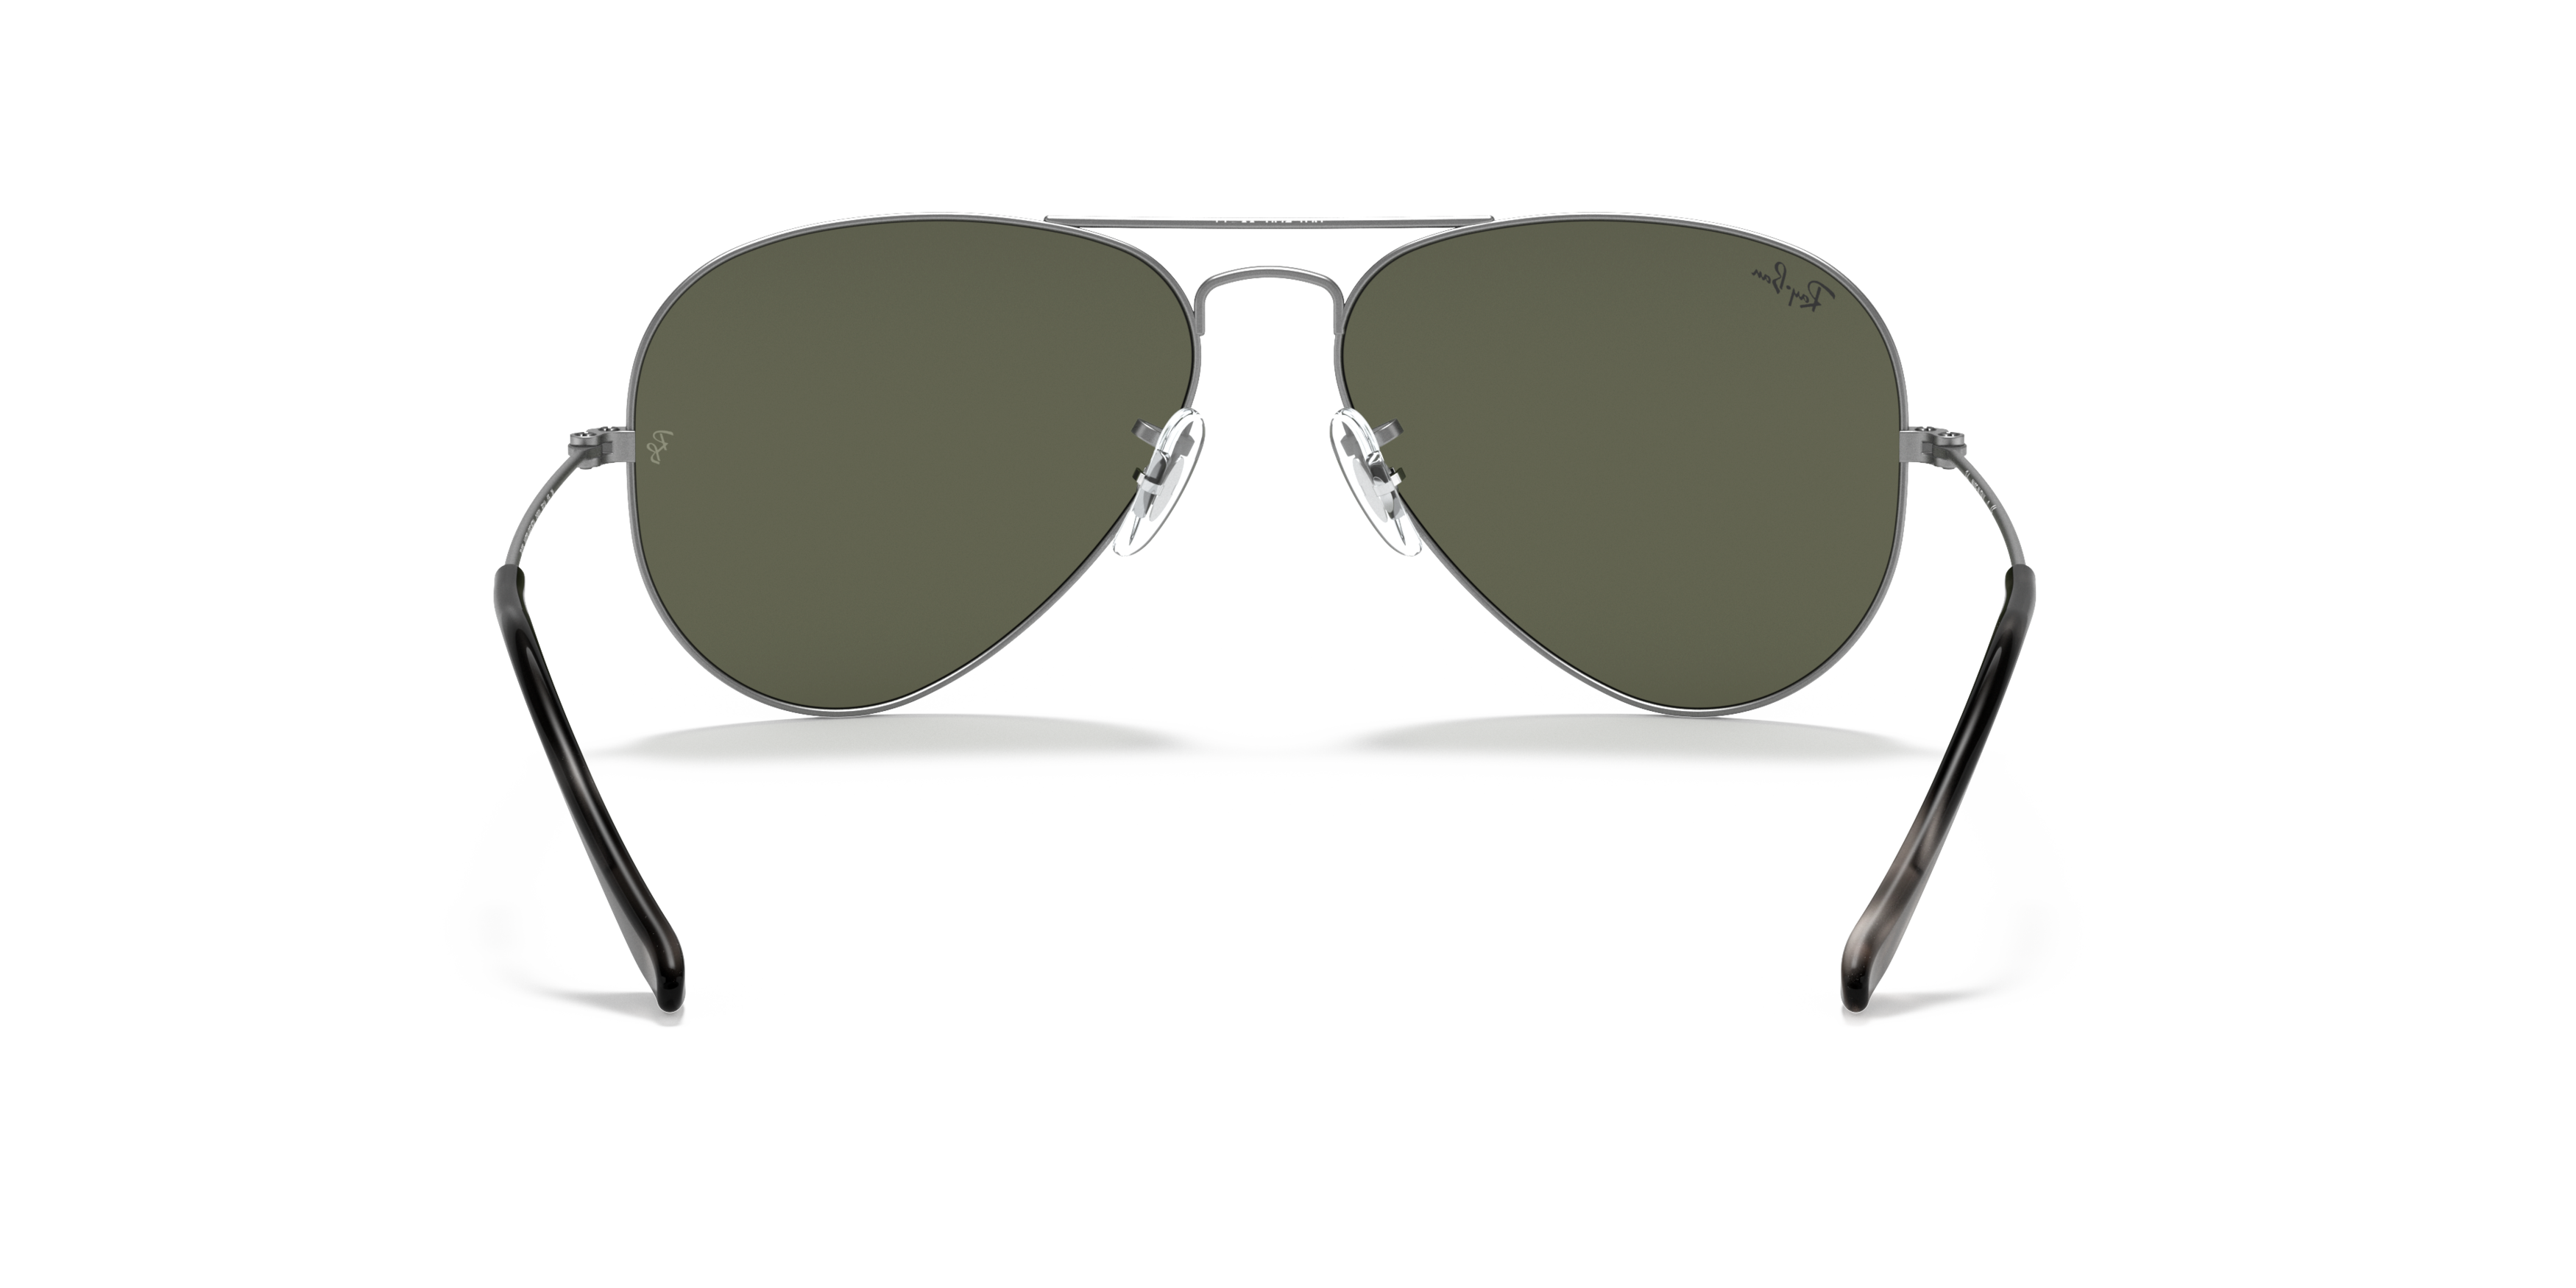 [products.image.detail02] Ray-Ban Aviator Classic RB3025 919031